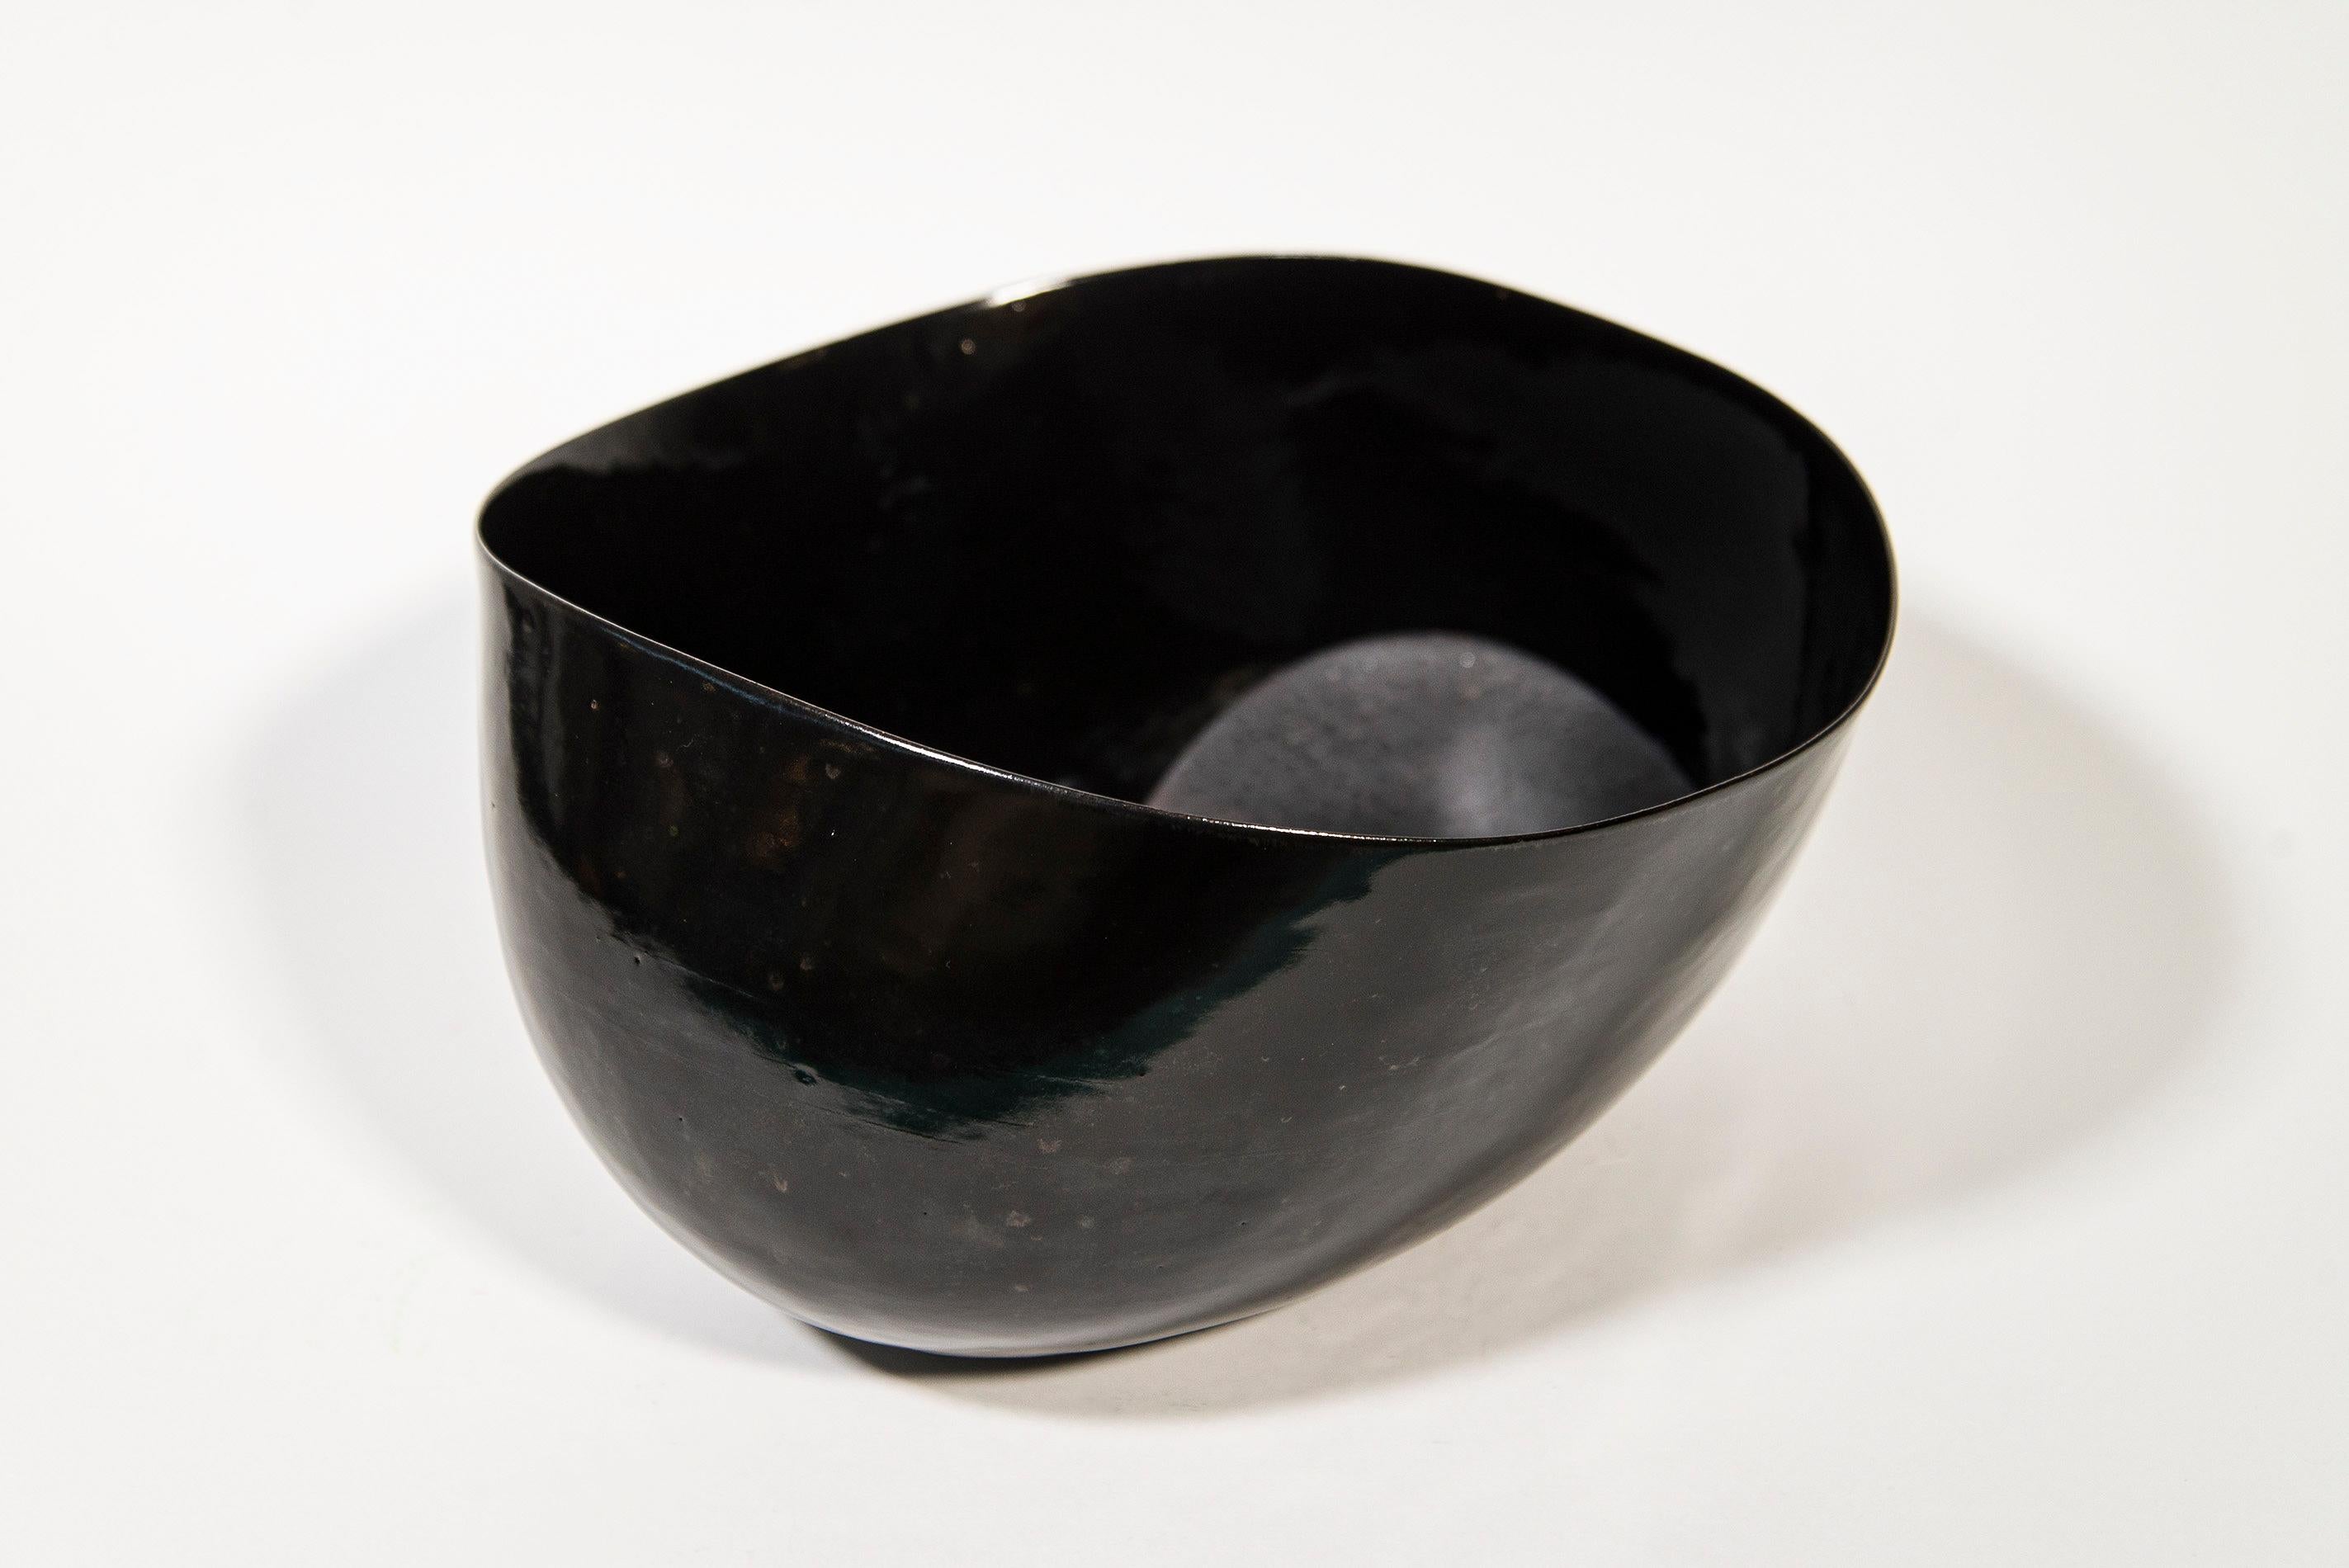 Canadian artist Steven Heinemann continues to re-define the limits of ceramic art with a new series of uniquely beautiful bowls called ‘Afterlife.’ This oval-shaped ceramic bowl has a glossy black exterior finish, and the interior is textured in a